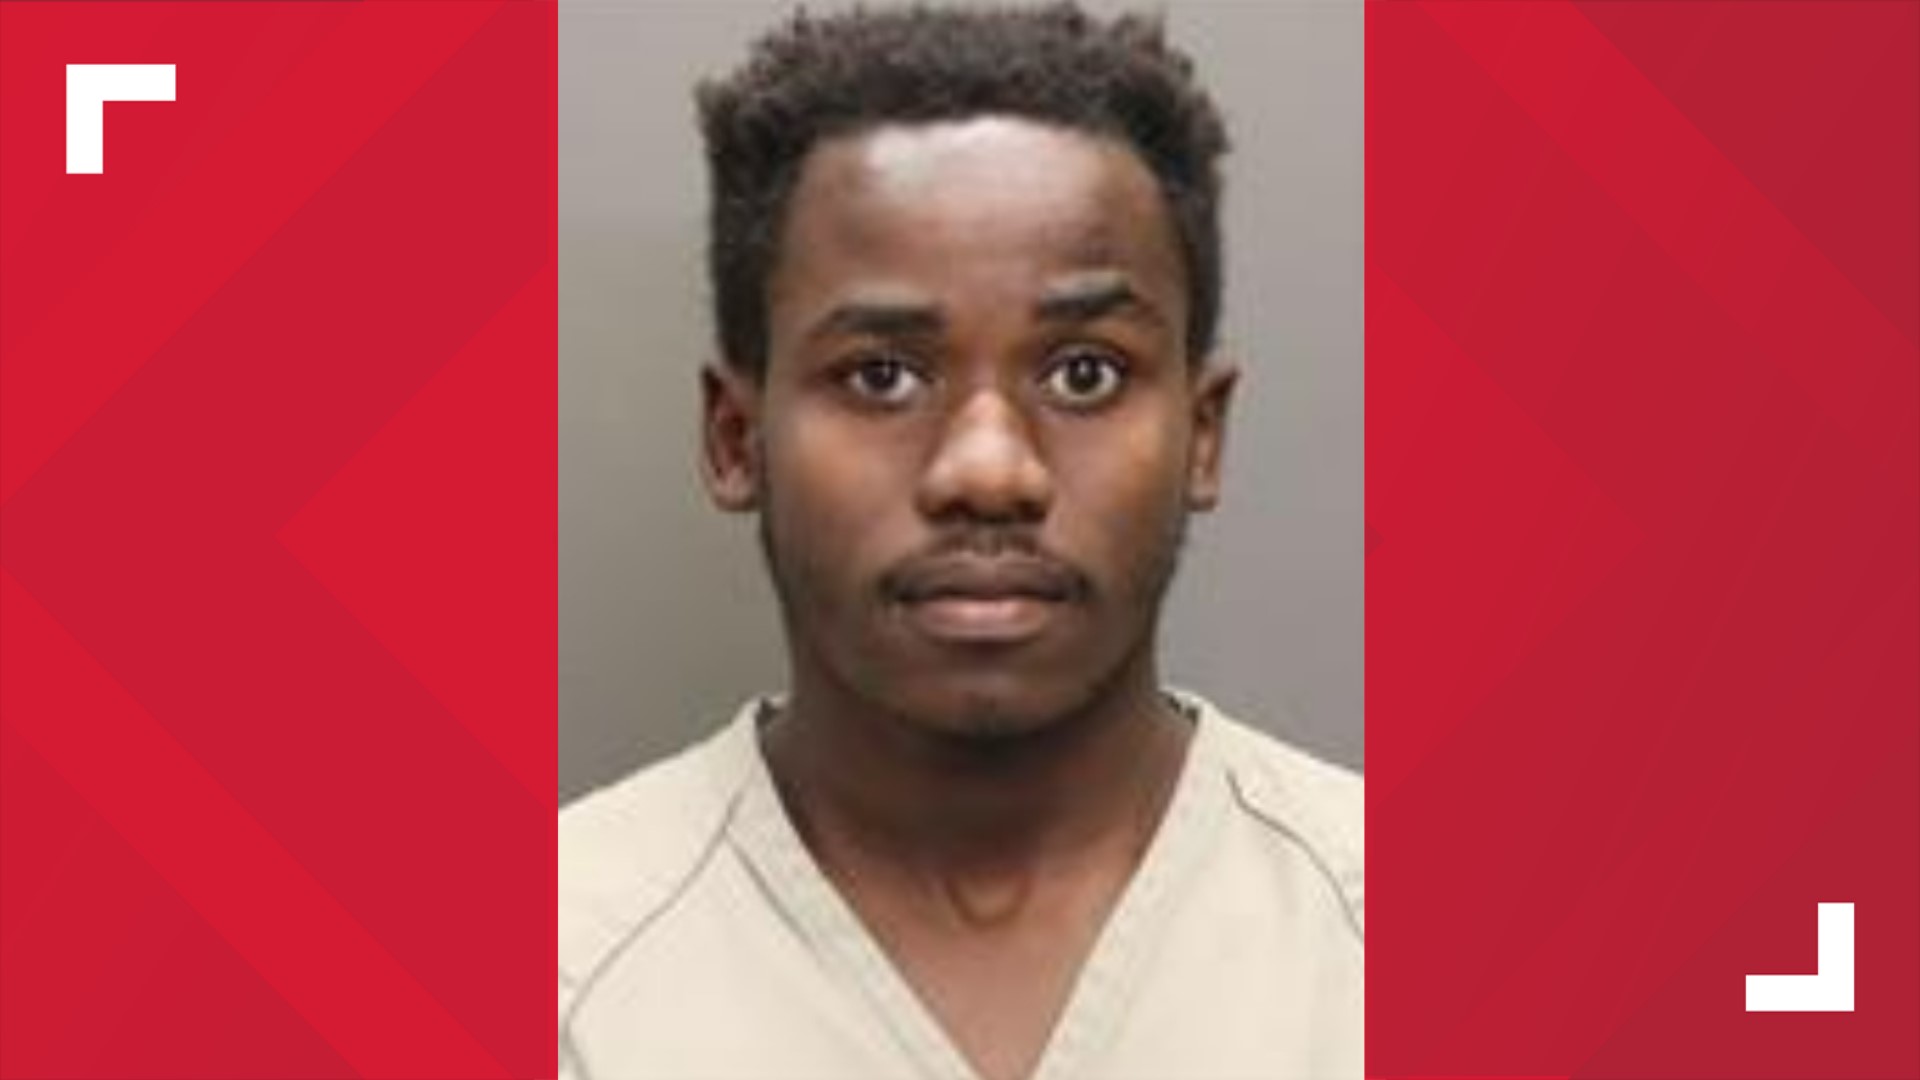 Hussein Bilal, 21, was charged with murder, felonious assault and two counts of robbery on Sept. 22. He was arrested six days later.